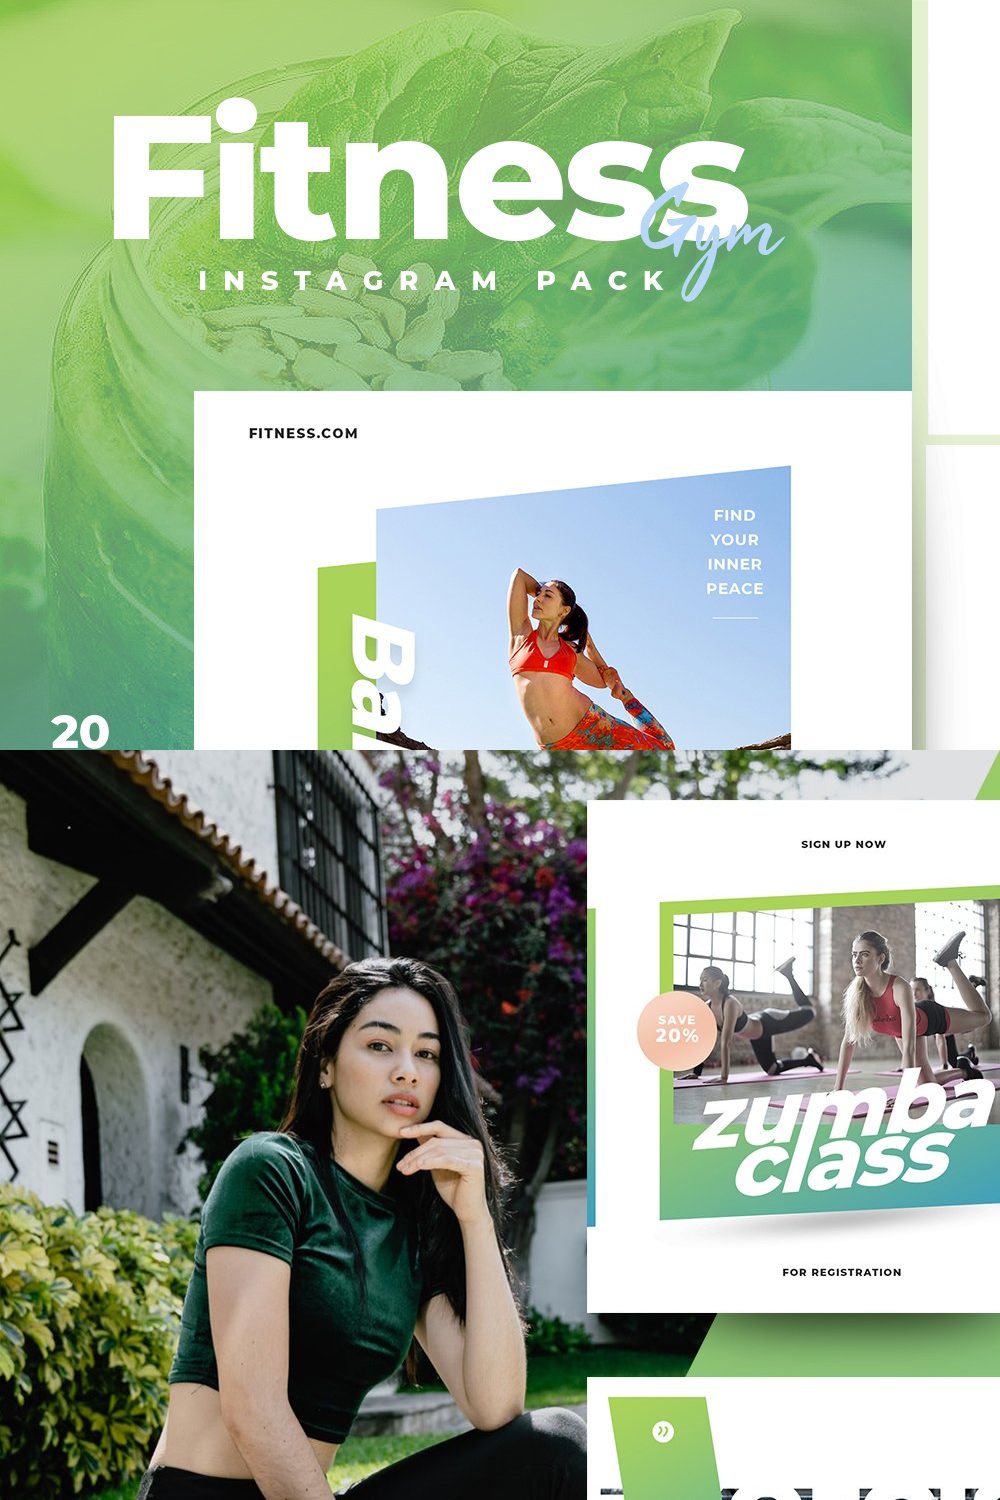 Fitness & Gym instagram pack 3.0 pinterest preview image.